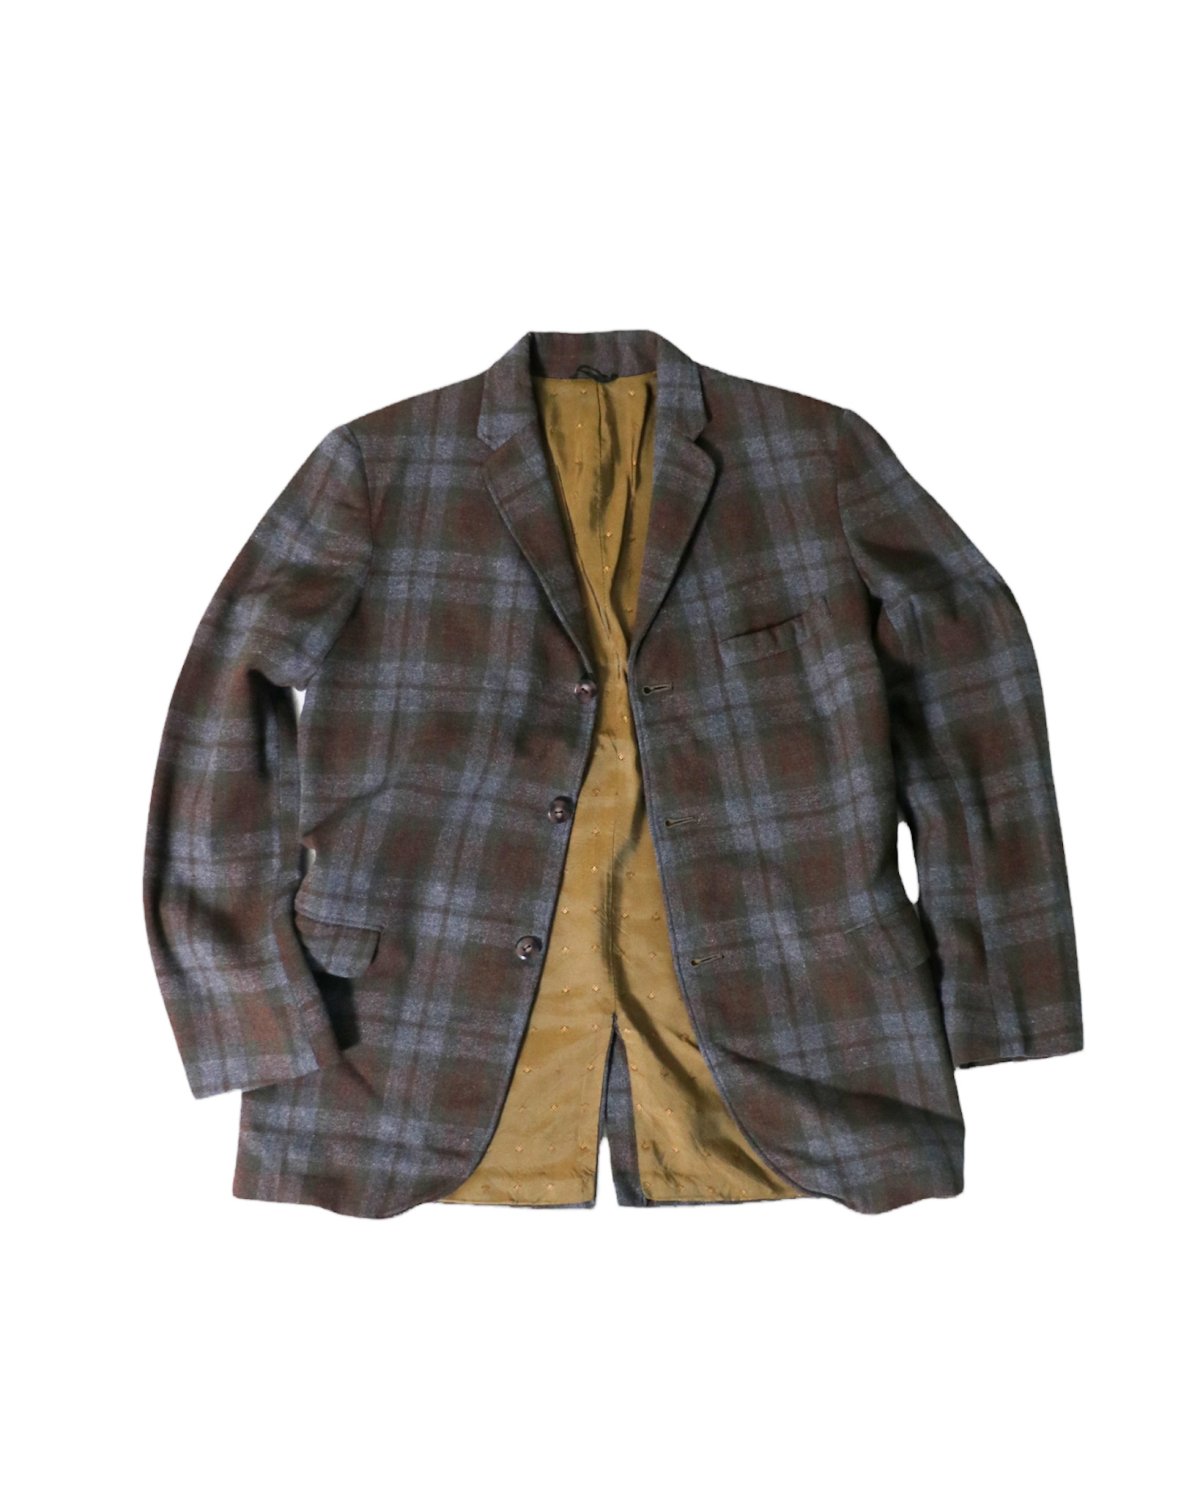 “PENNEY’S” Wool Tailored Jacket